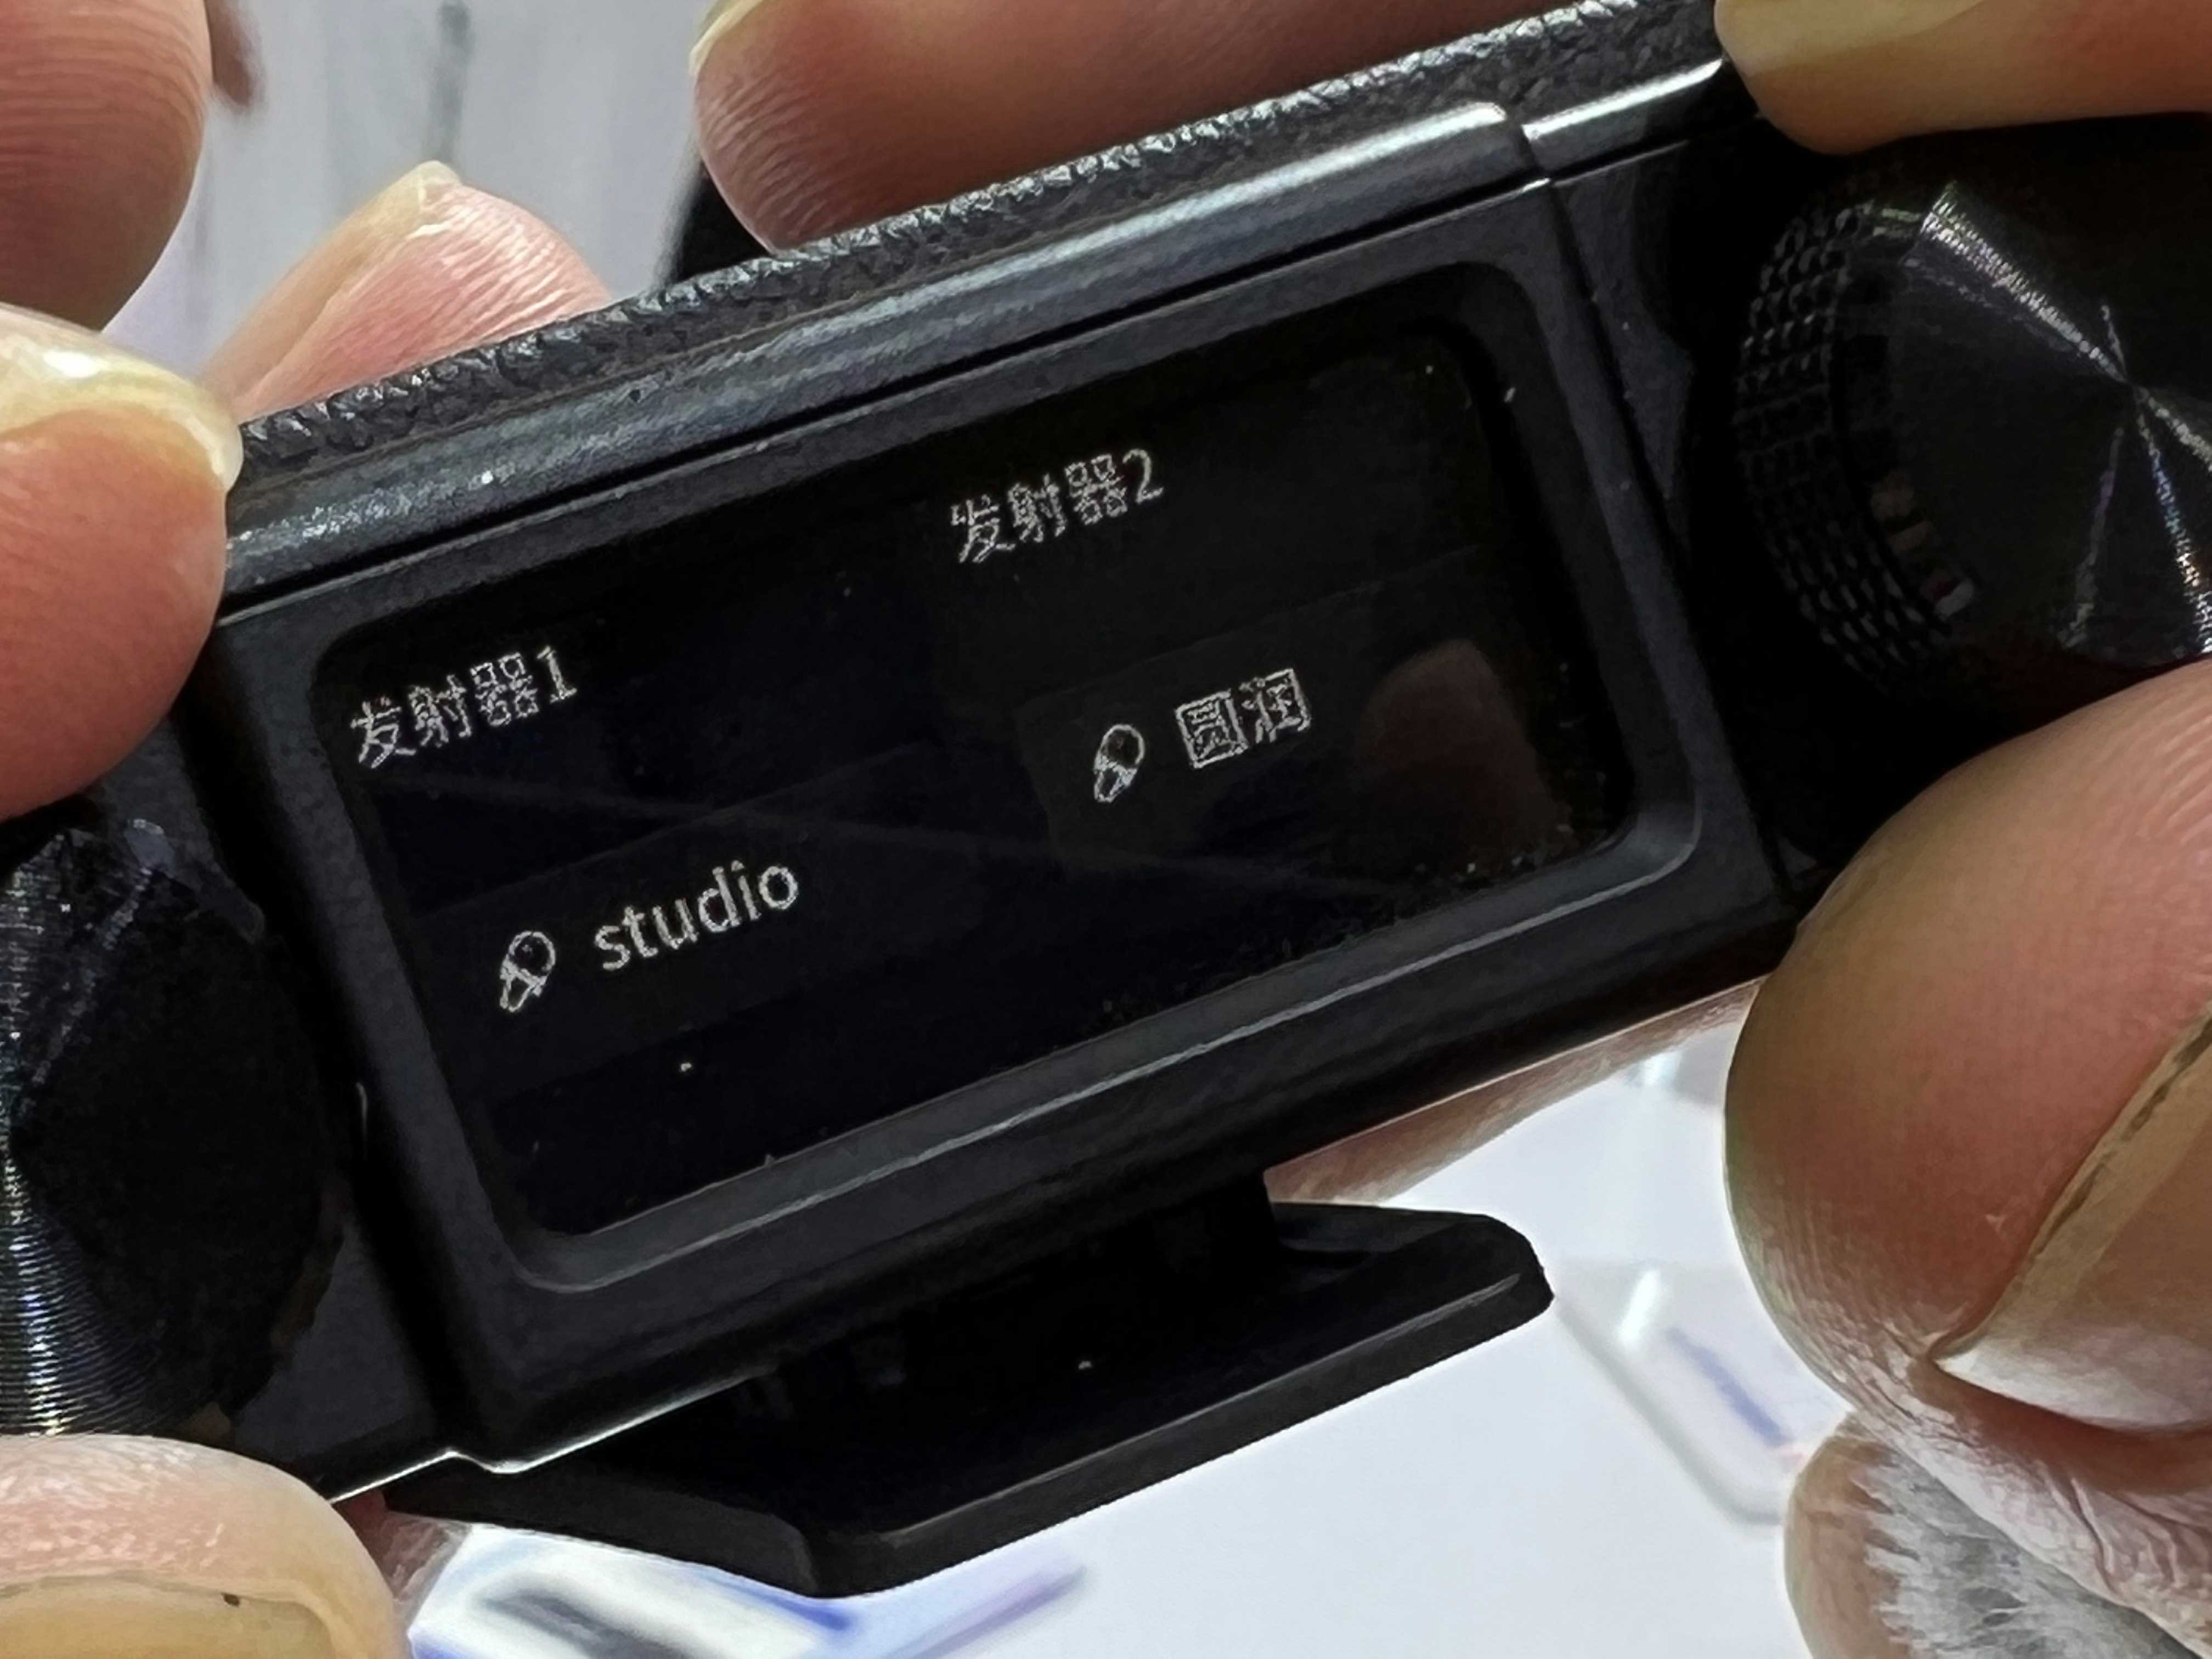 iFLYTEK's wireless microphone kit can correct people with different accent closer to standard mandarin, April 11, 2023. 